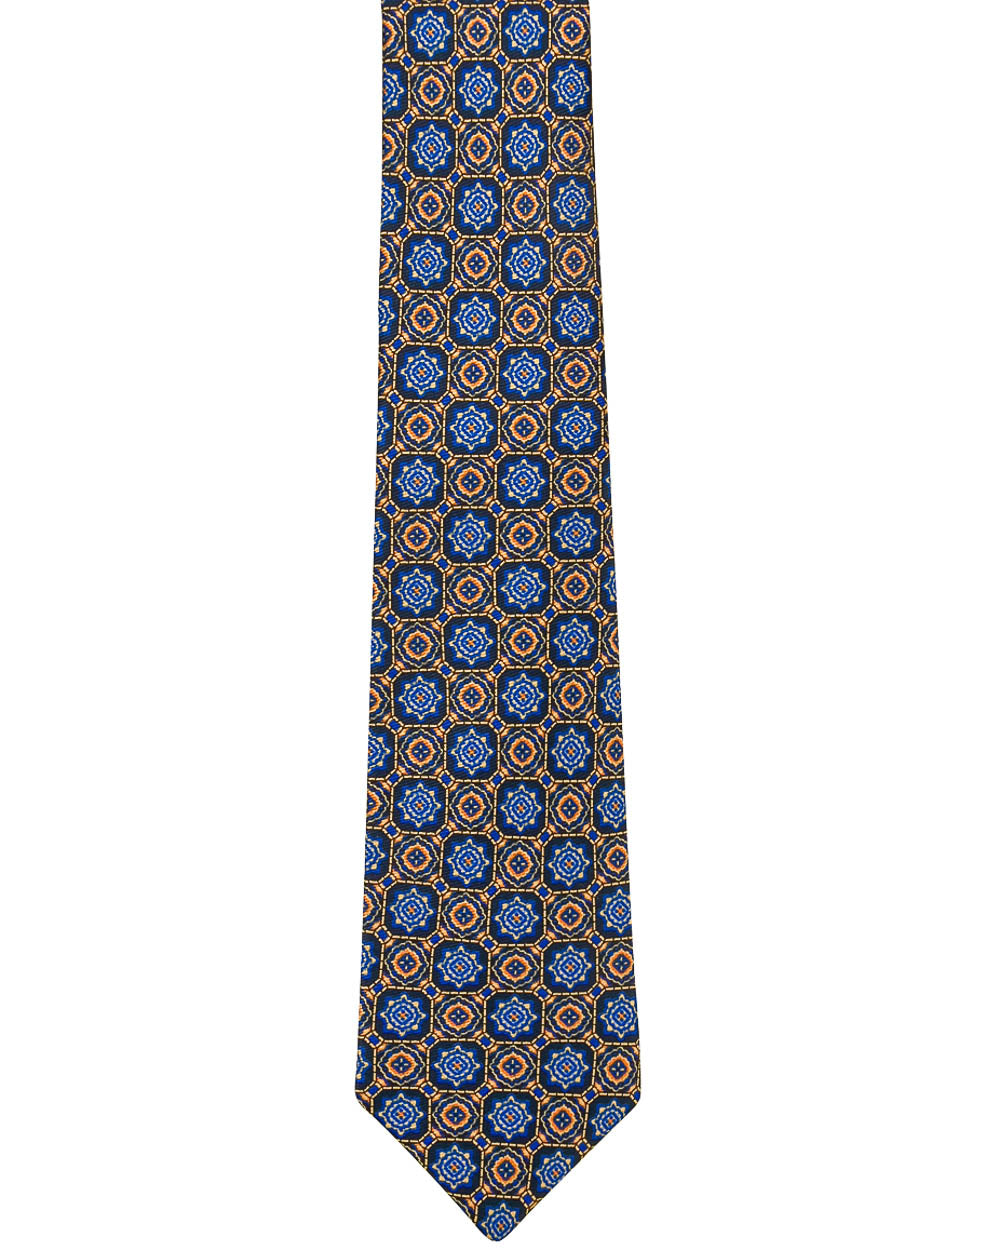 Blue with Orange and Yellow Medallion Tie